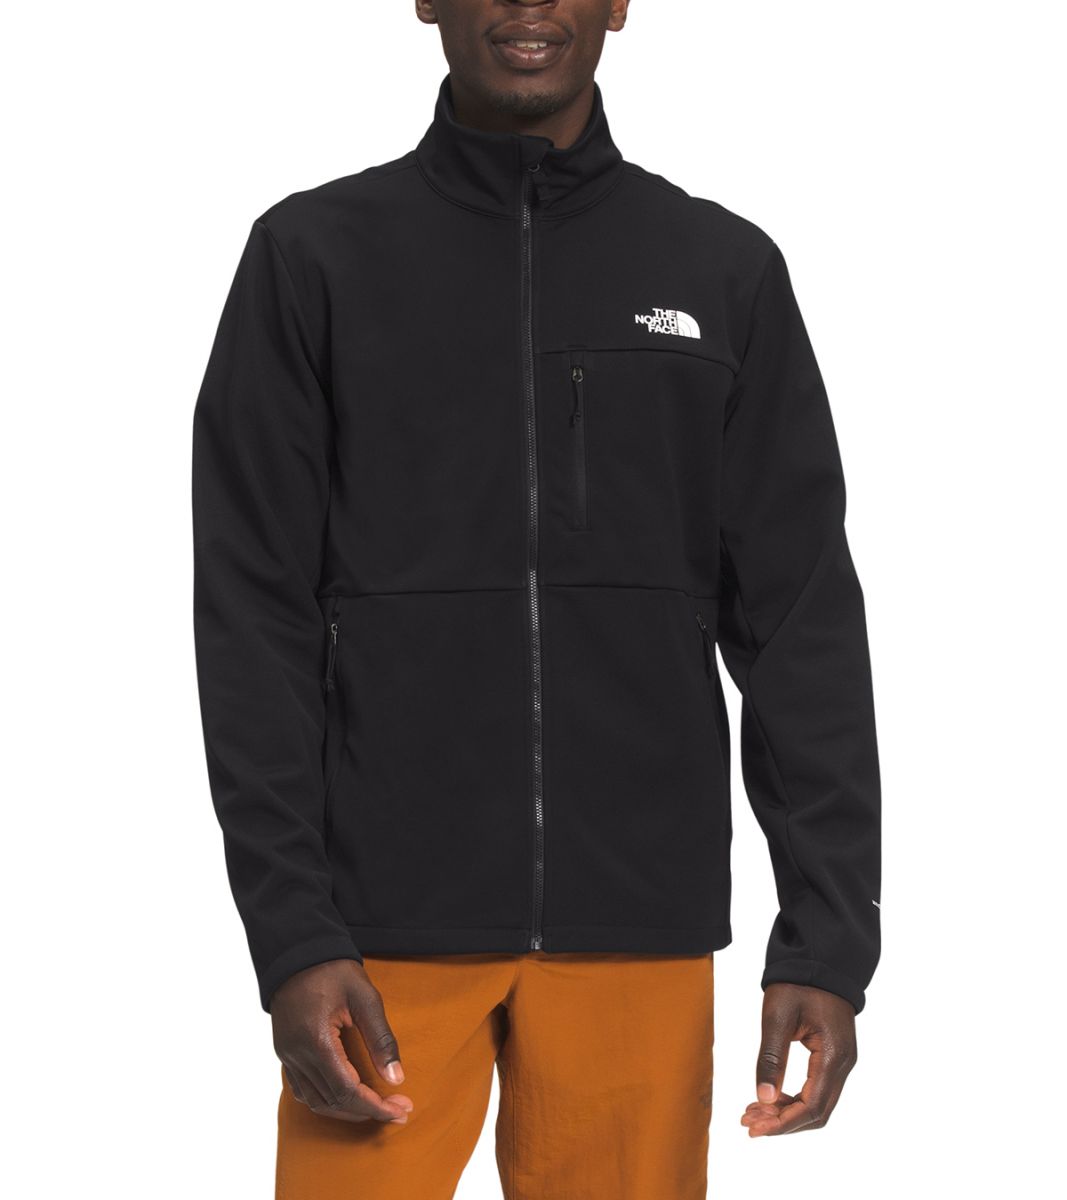 Vermont Gear - Farm-Way: The North Face Men's Apex Canyonwall Eco Jacket